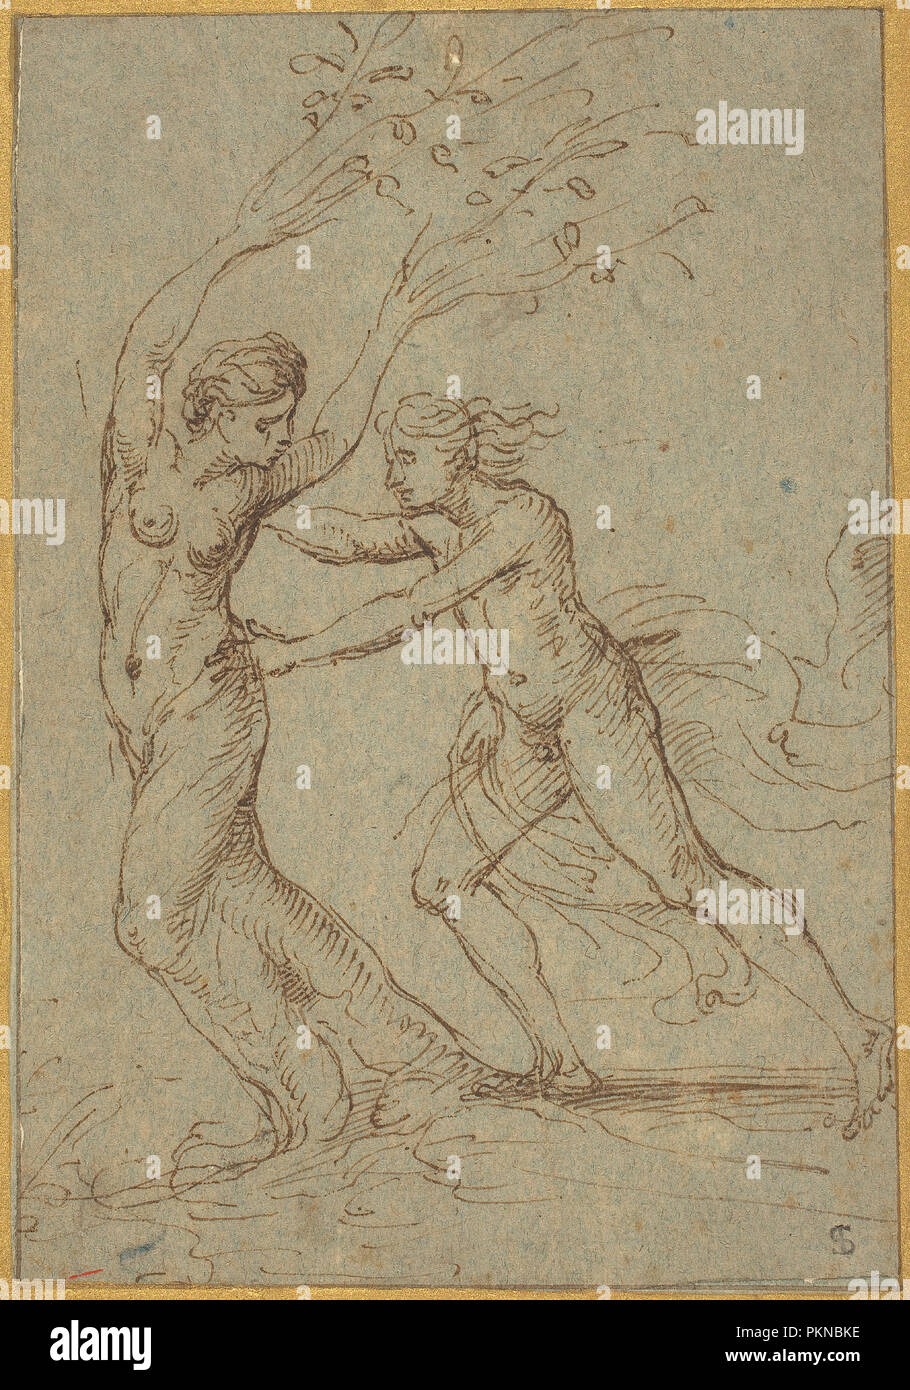 Apollo and Daphne. Dimensions: sheet: 15.1 x 10.4 cm (5 15/16 x 4 1/8 in.). Medium: pen and brown ink on green-blue laid paper. Museum: National Gallery of Art, Washington DC. Author: Follower of Giulio Romano. Stock Photo